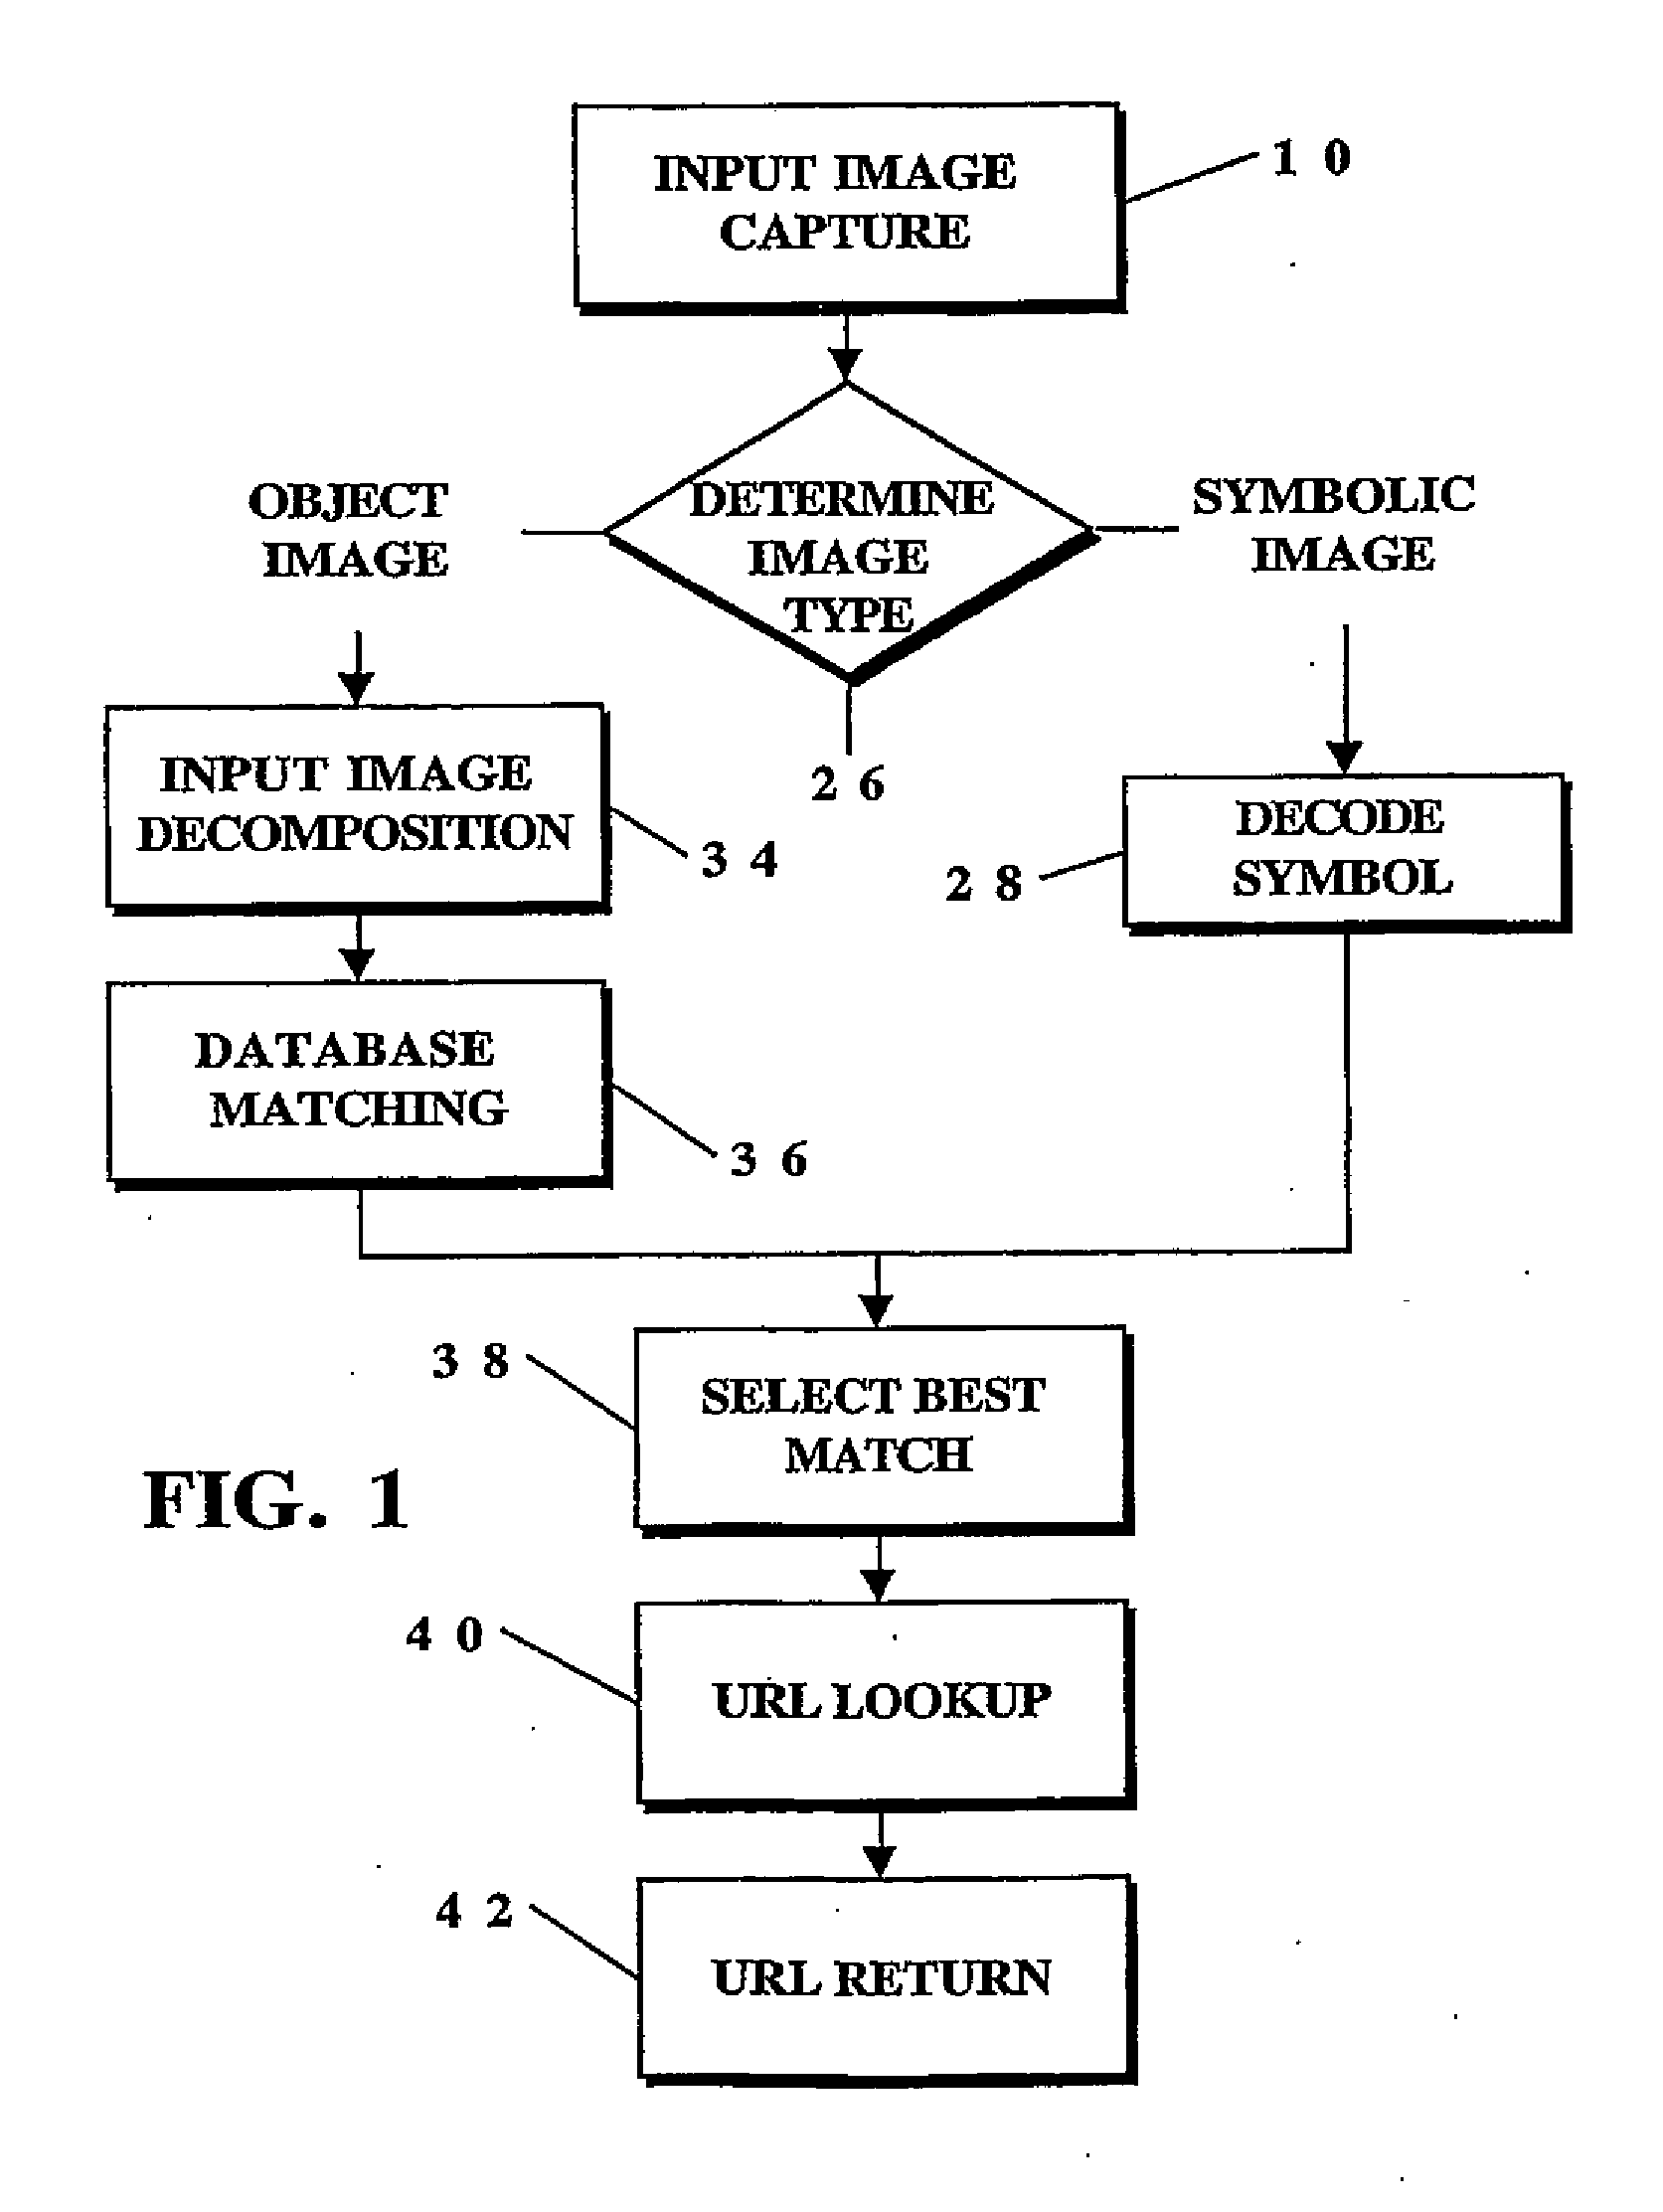 Image Capture and Identification System and Process